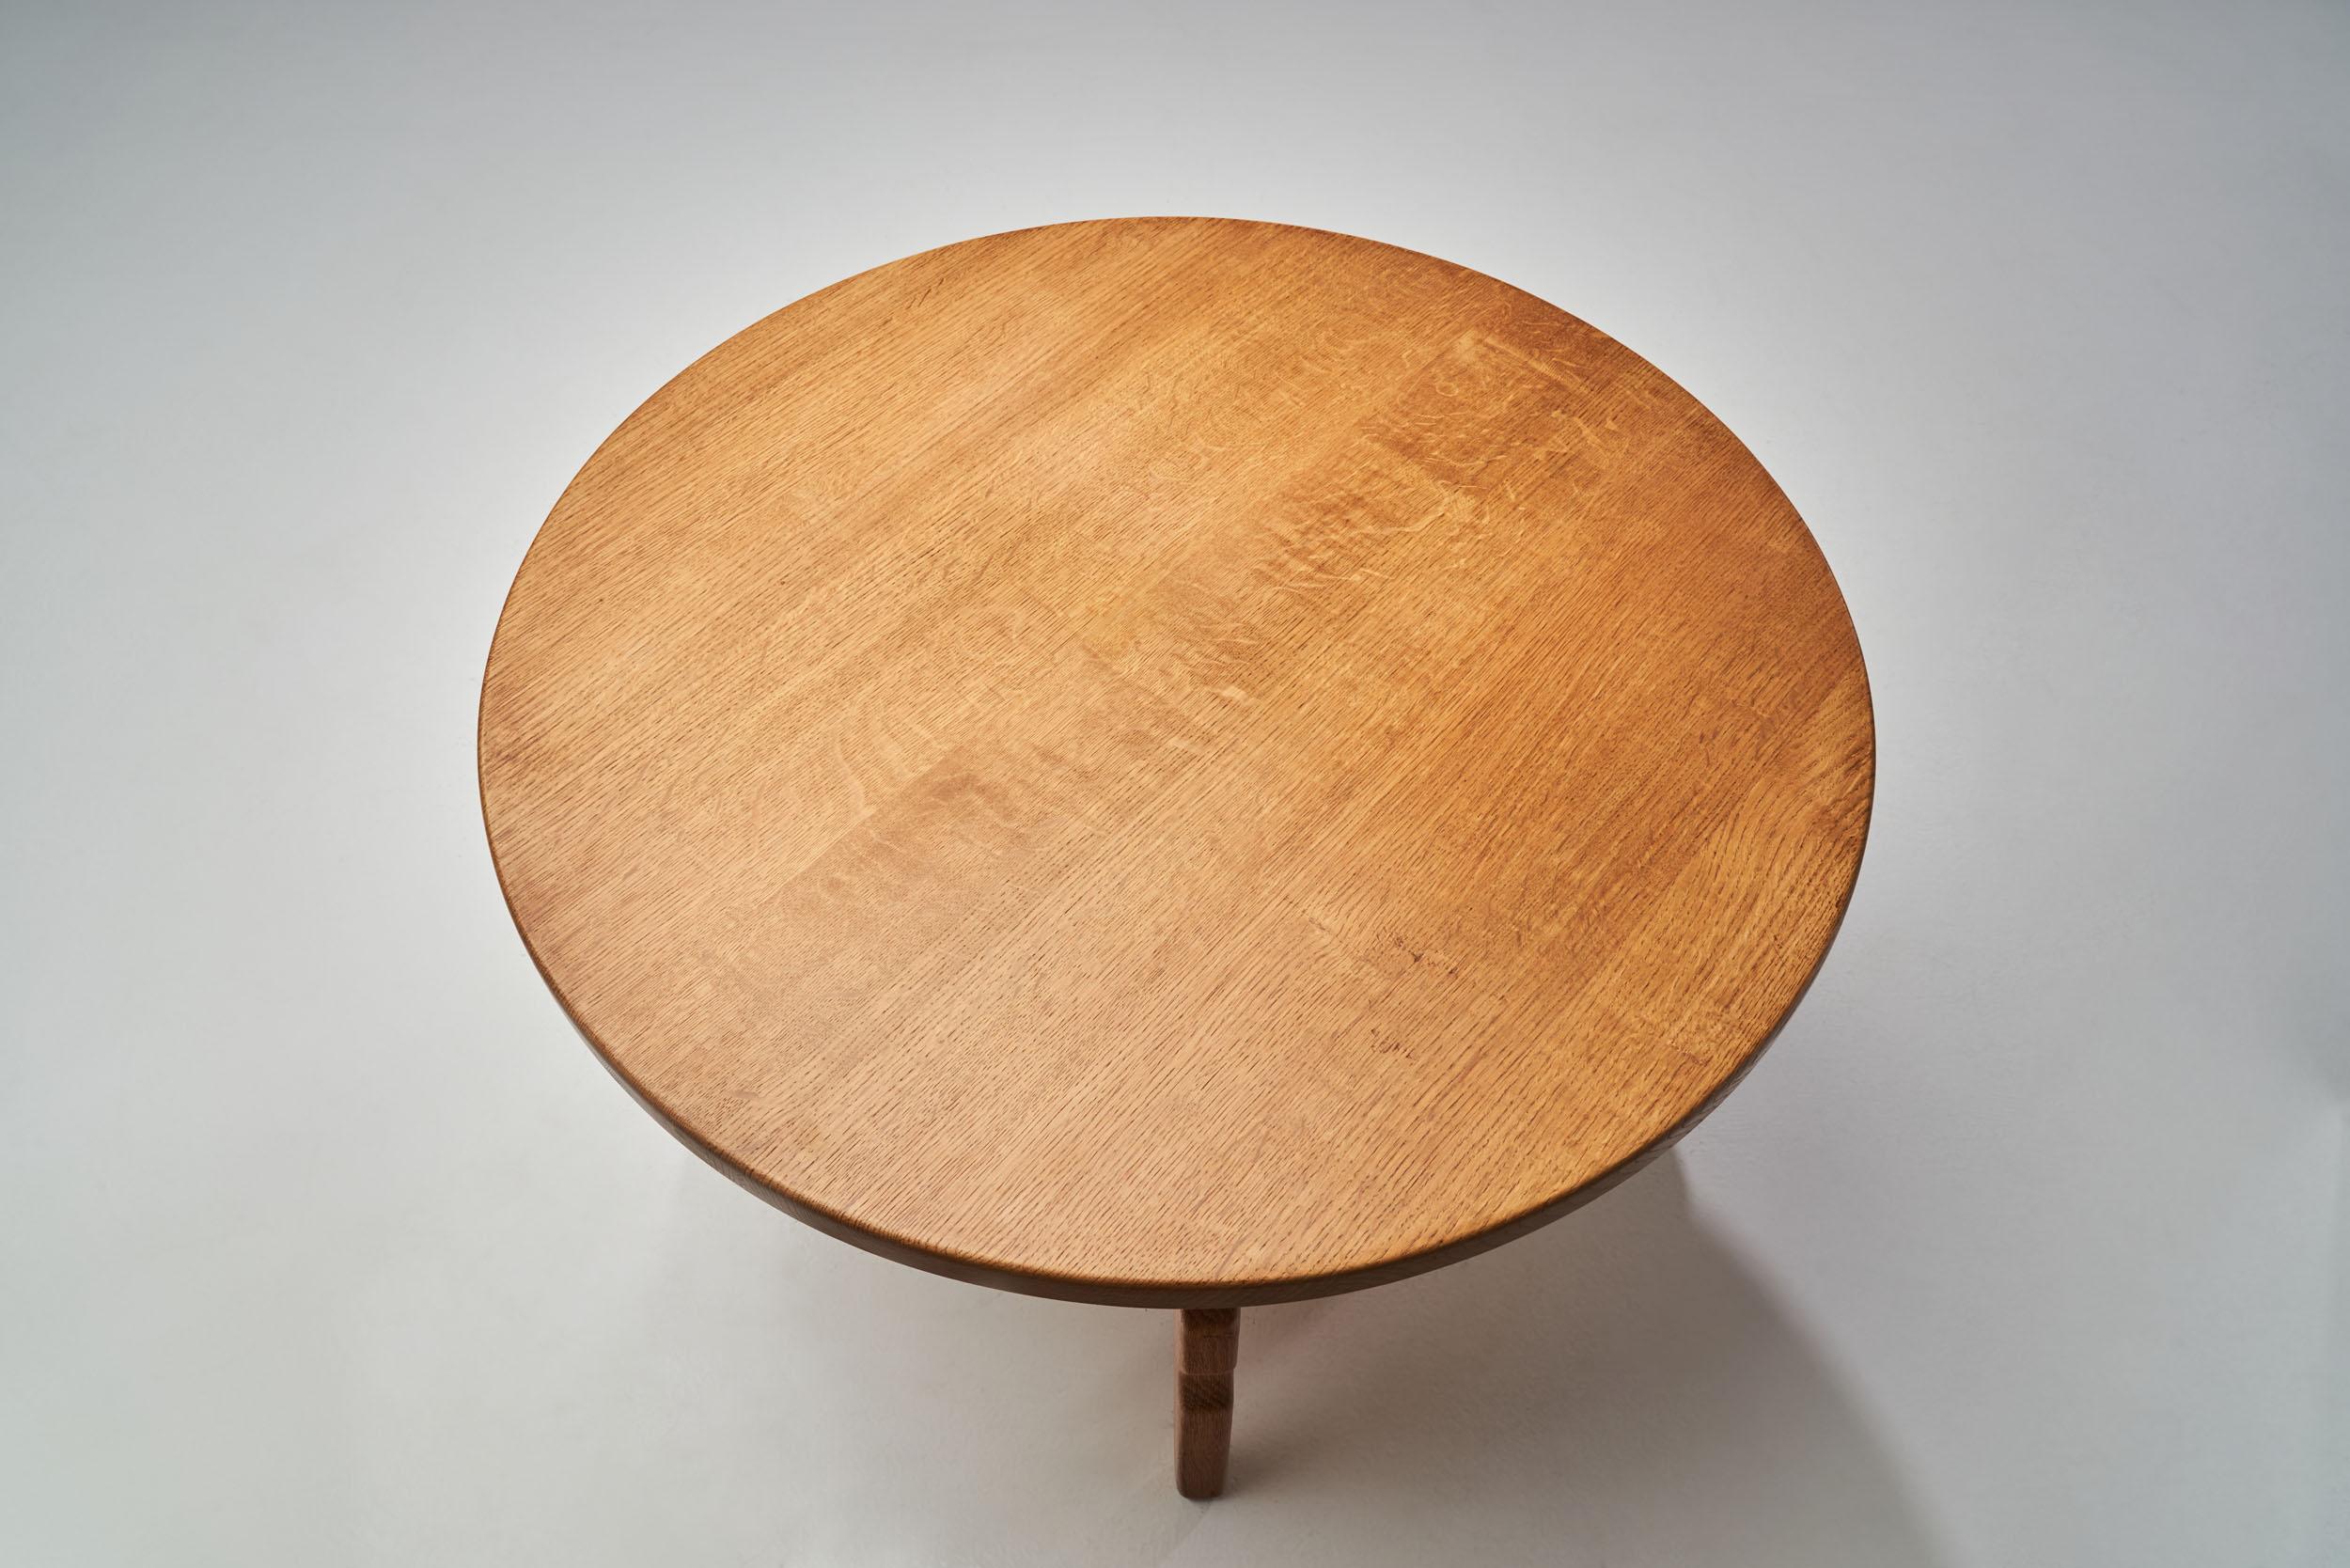 Mid-20th Century Solid Oak Coffee Table with Sculptural Legs, Denmark, ca 1950s For Sale